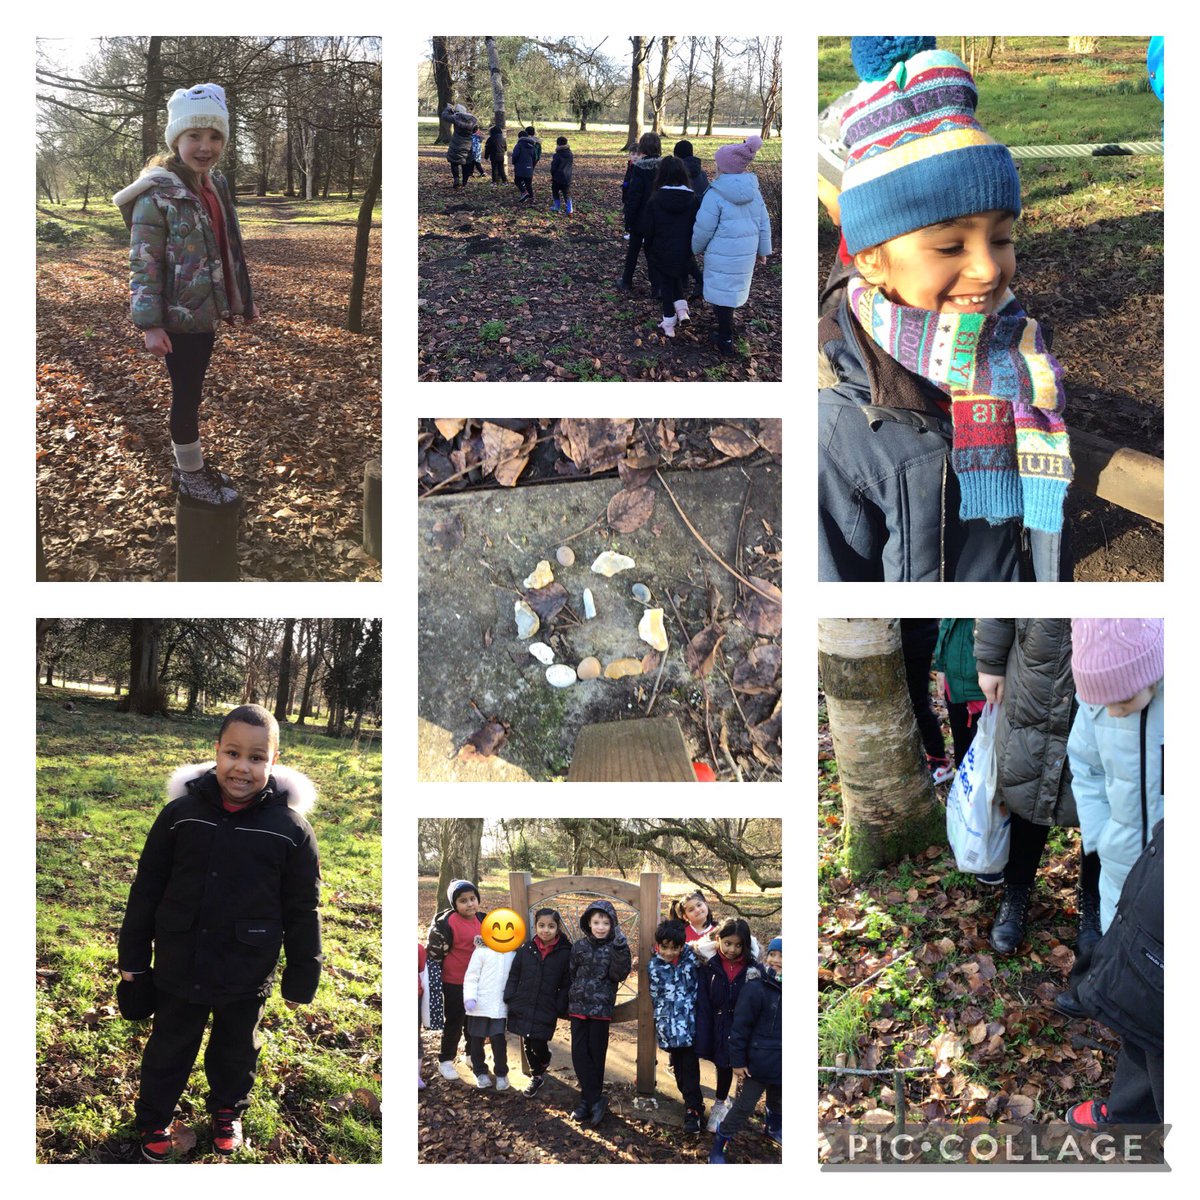 Year 2 had great time at Bute park last week making trails just like Hansel and Gretel. #ButePark #PupilVoice #LoudAndProud